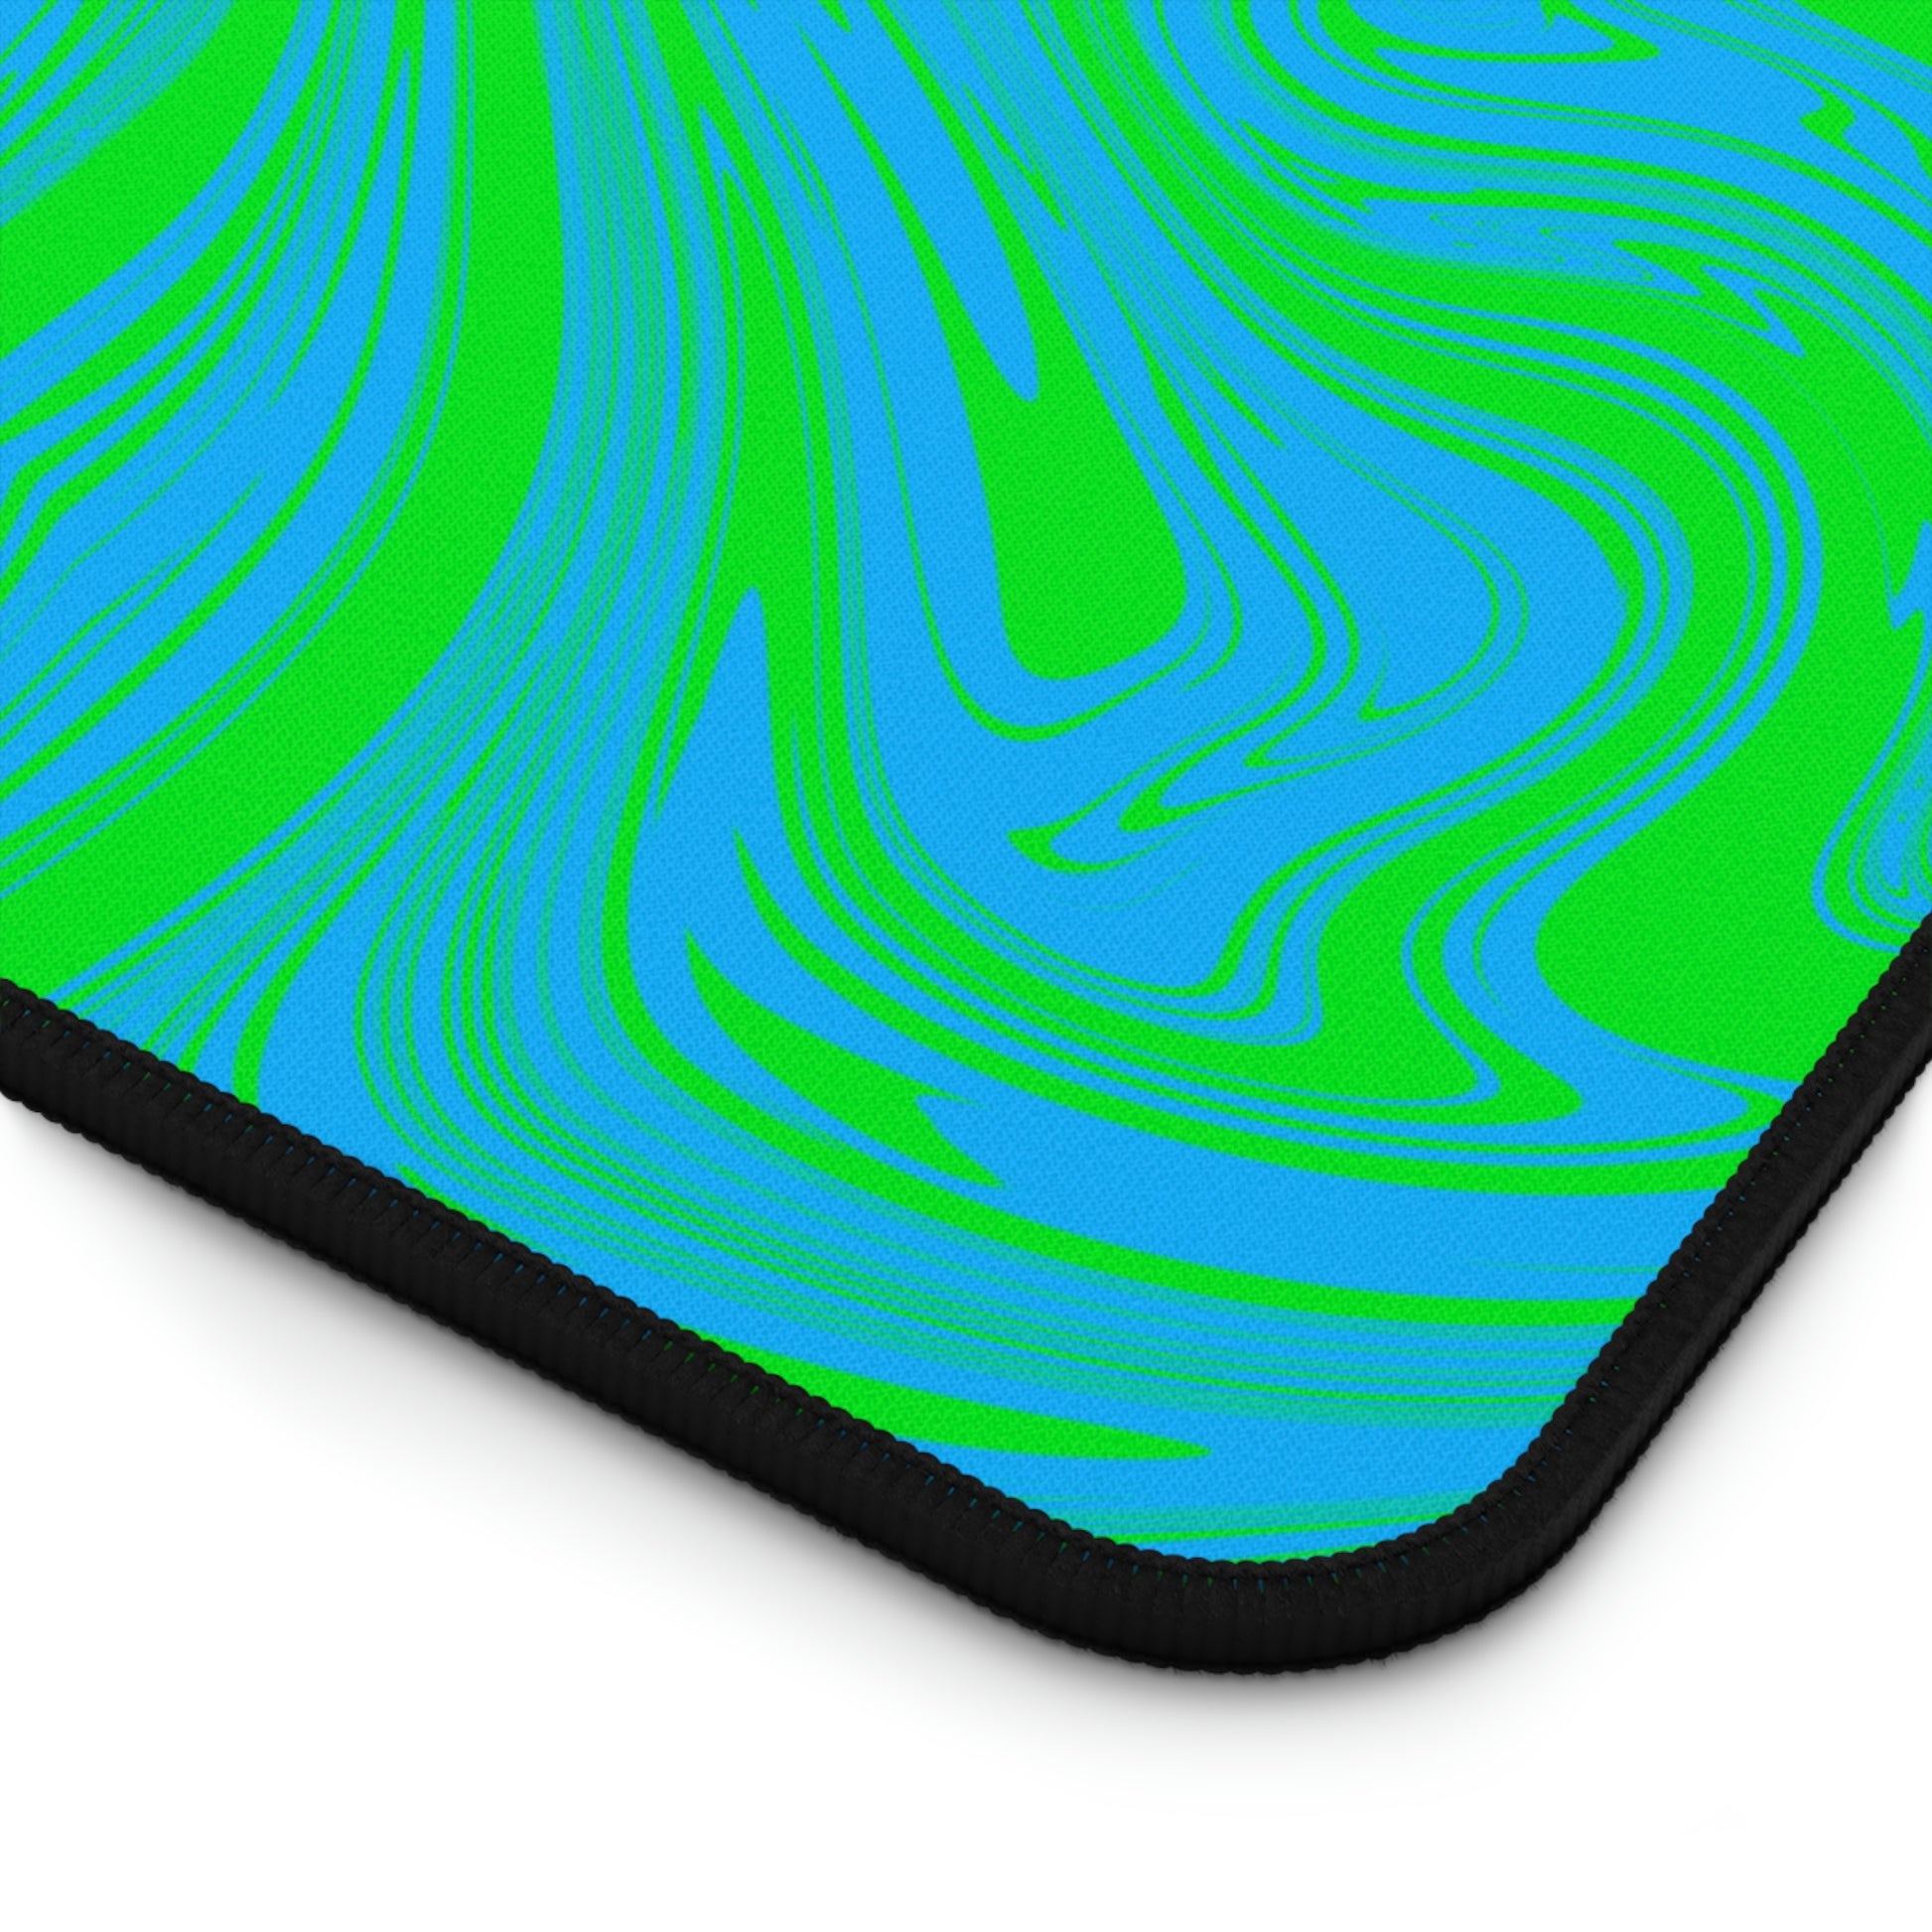 The corner of a 12" x 22" desk mat with blue and green swirls.